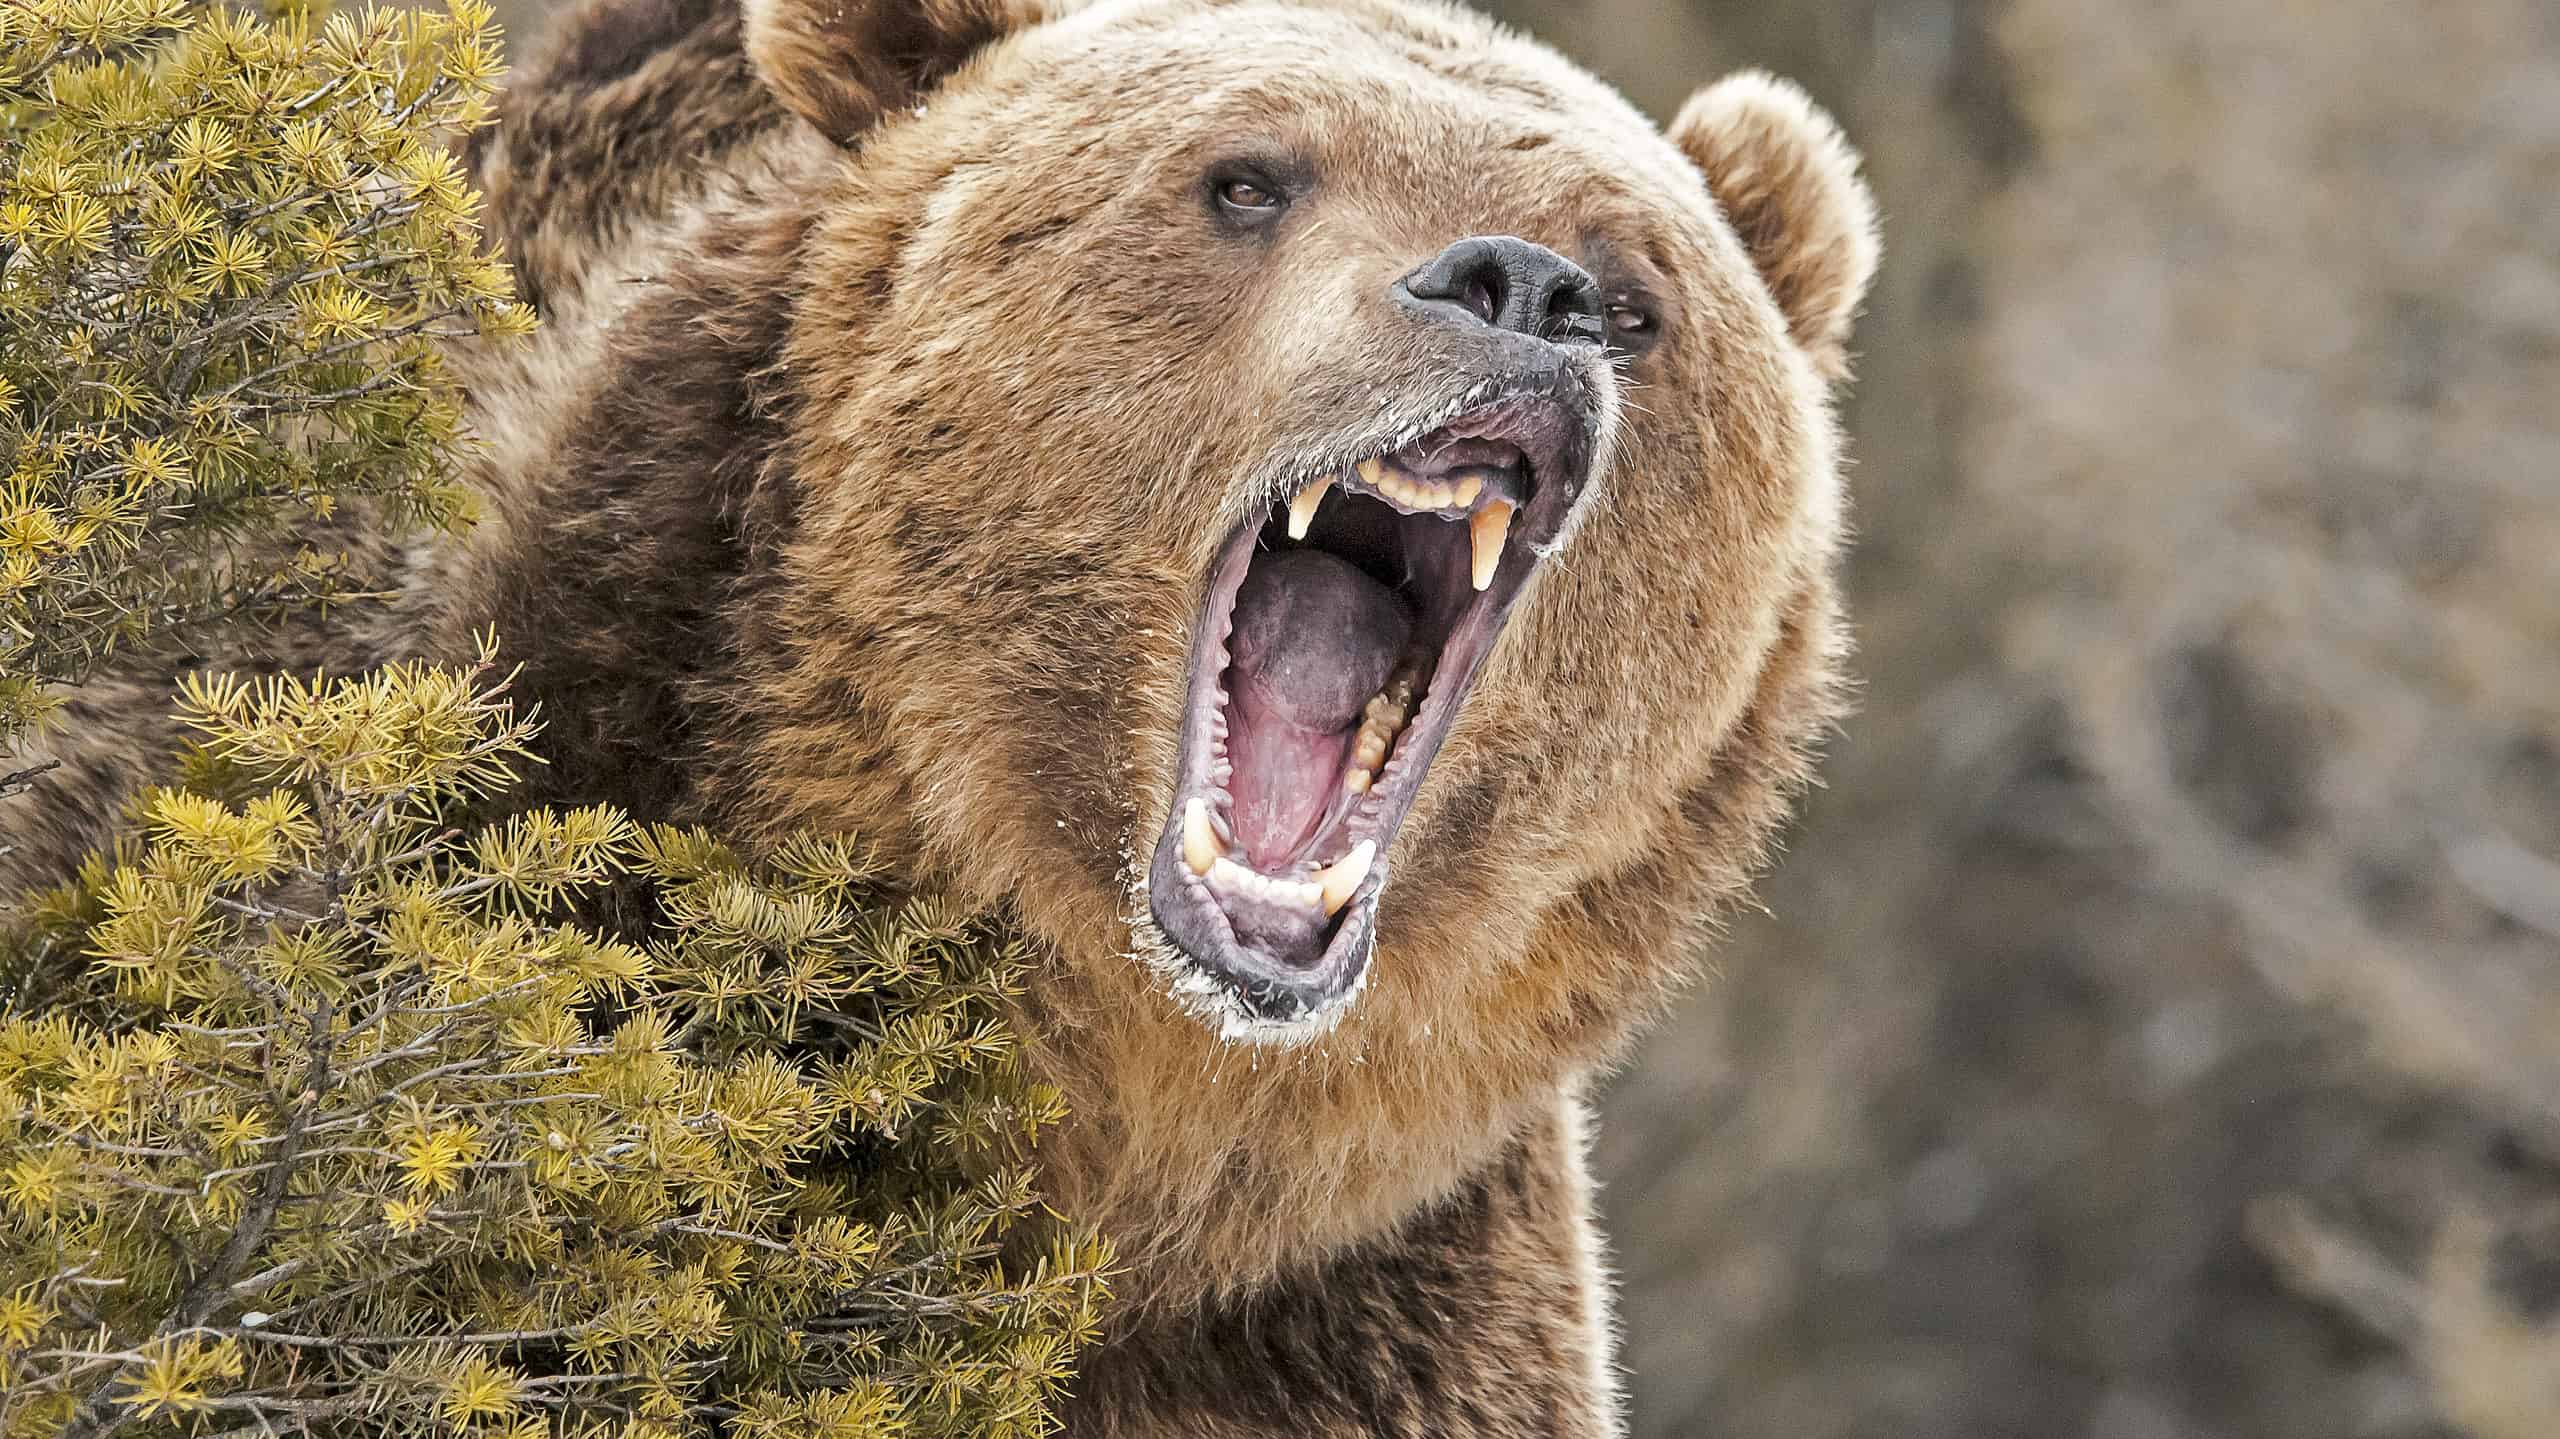 Big Grizzly Bear Attack